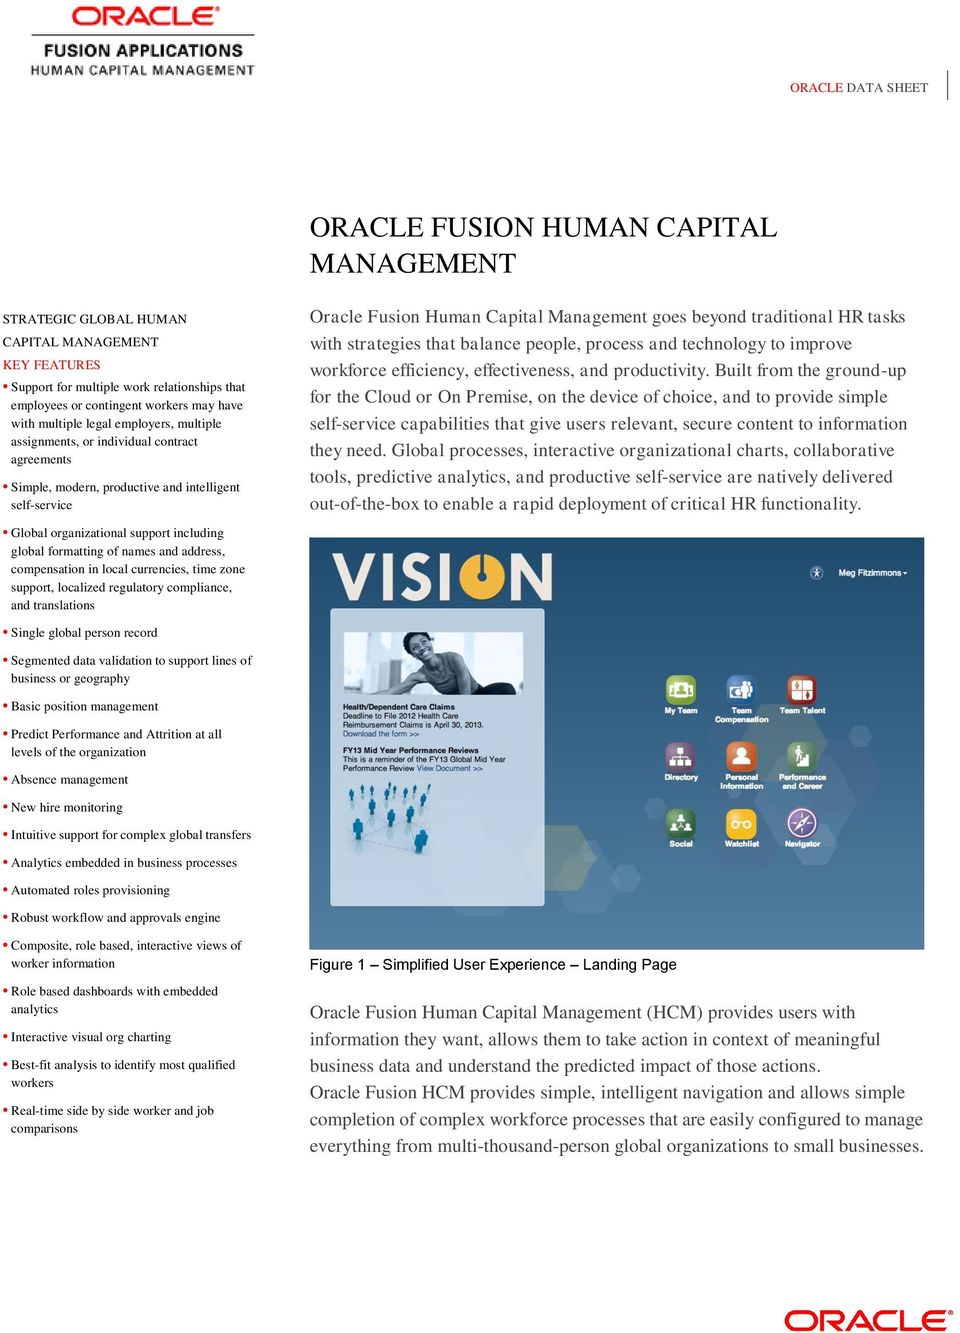 address, compensation in local currencies, time zone support, localized regulatory compliance, and translations Oracle Fusion Human Capital Management goes beyond traditional HR tasks with strategies